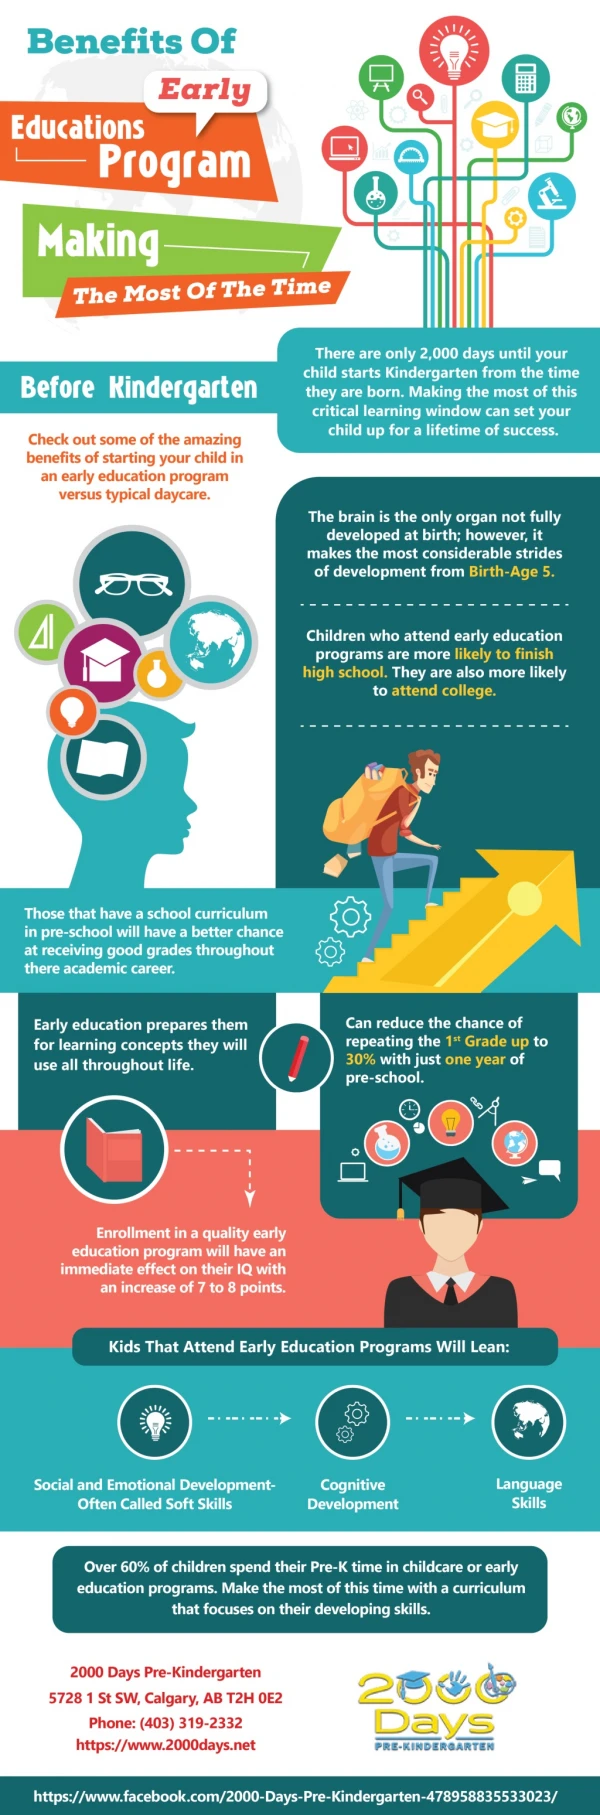 Benefits of Early Education Programs